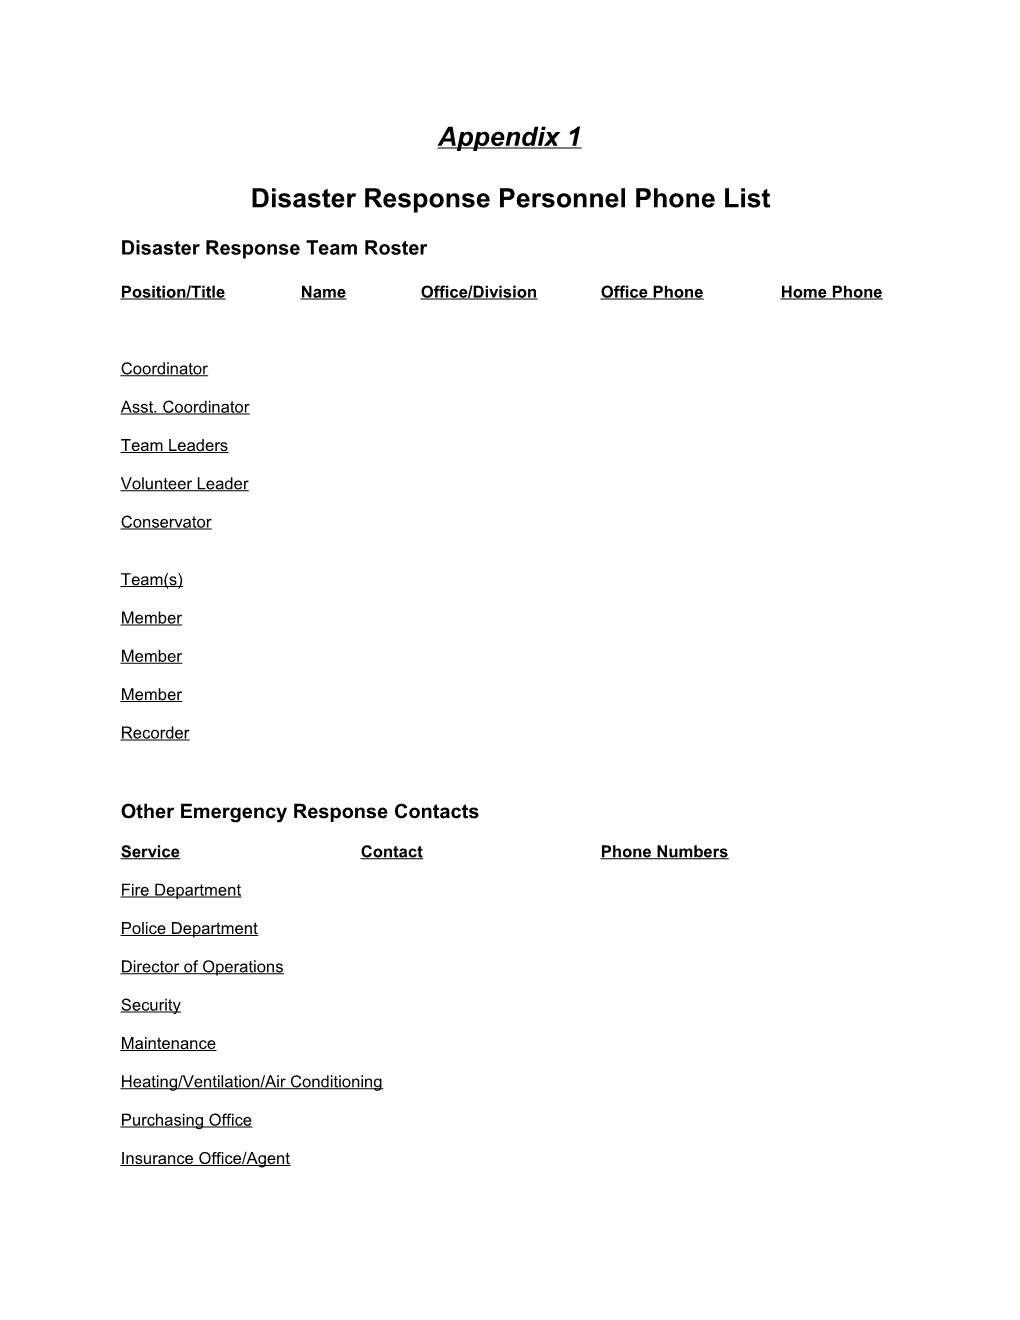 Disaster Response Personnel Phone List